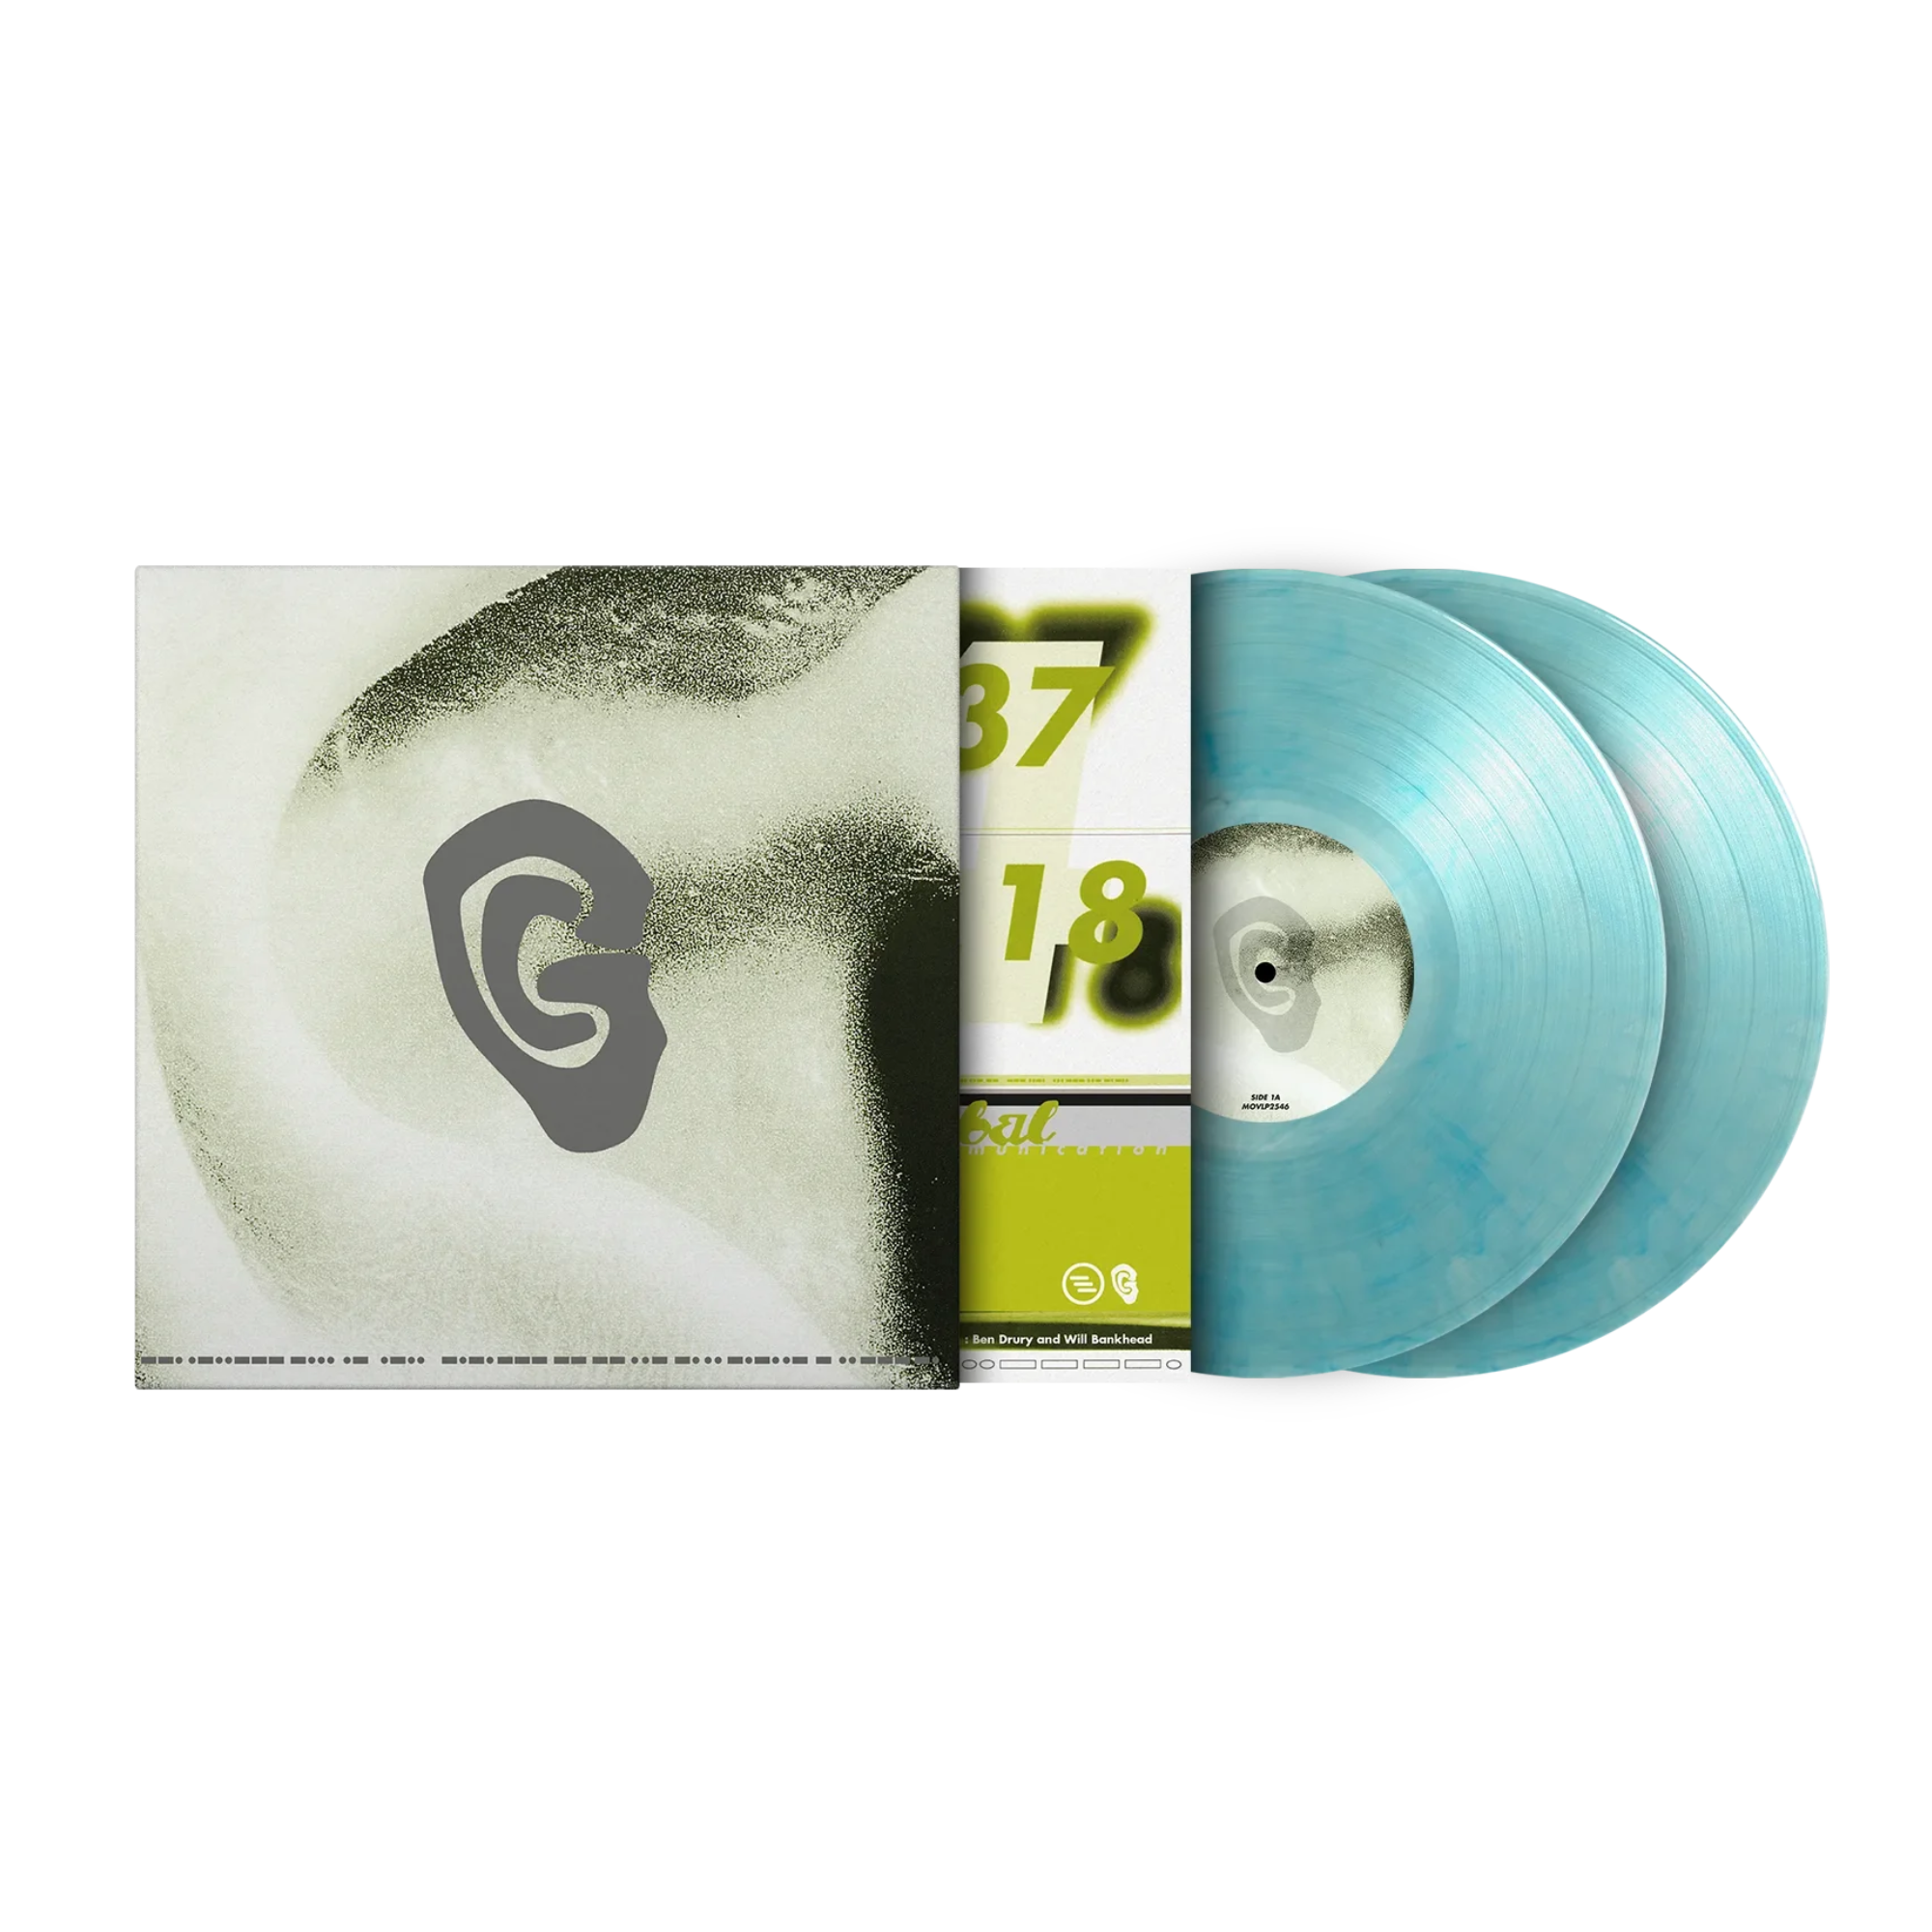 Global Communication - 76:14: Limited Crystal Clear Translucent Green 2LP